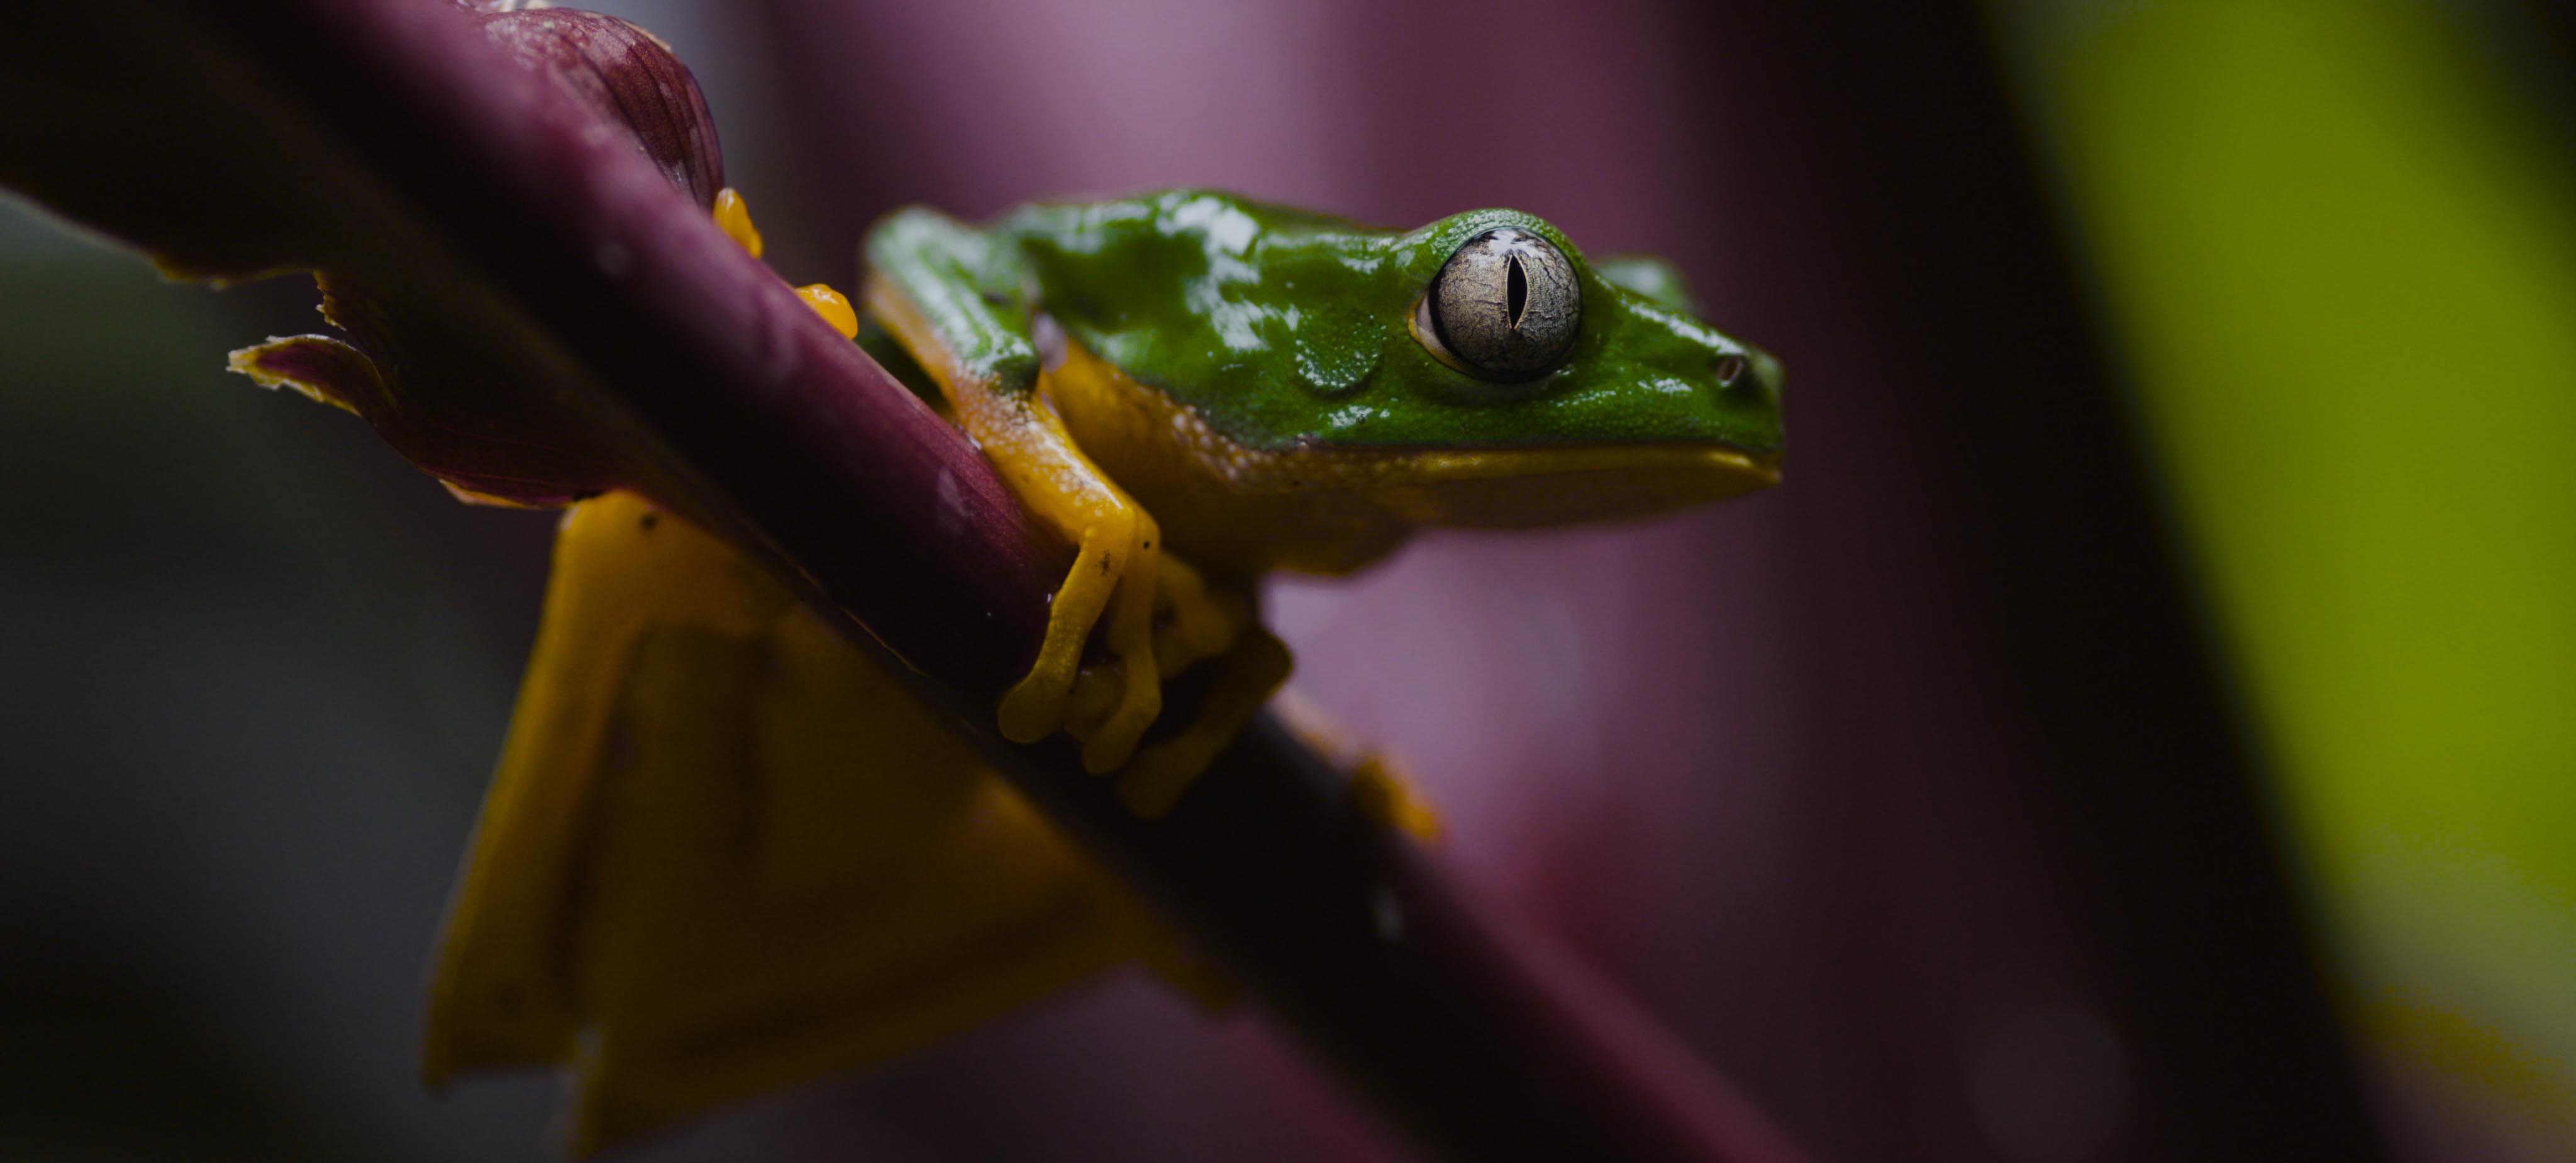 This image shows a green and yellow frog against a purple background in the jungle 